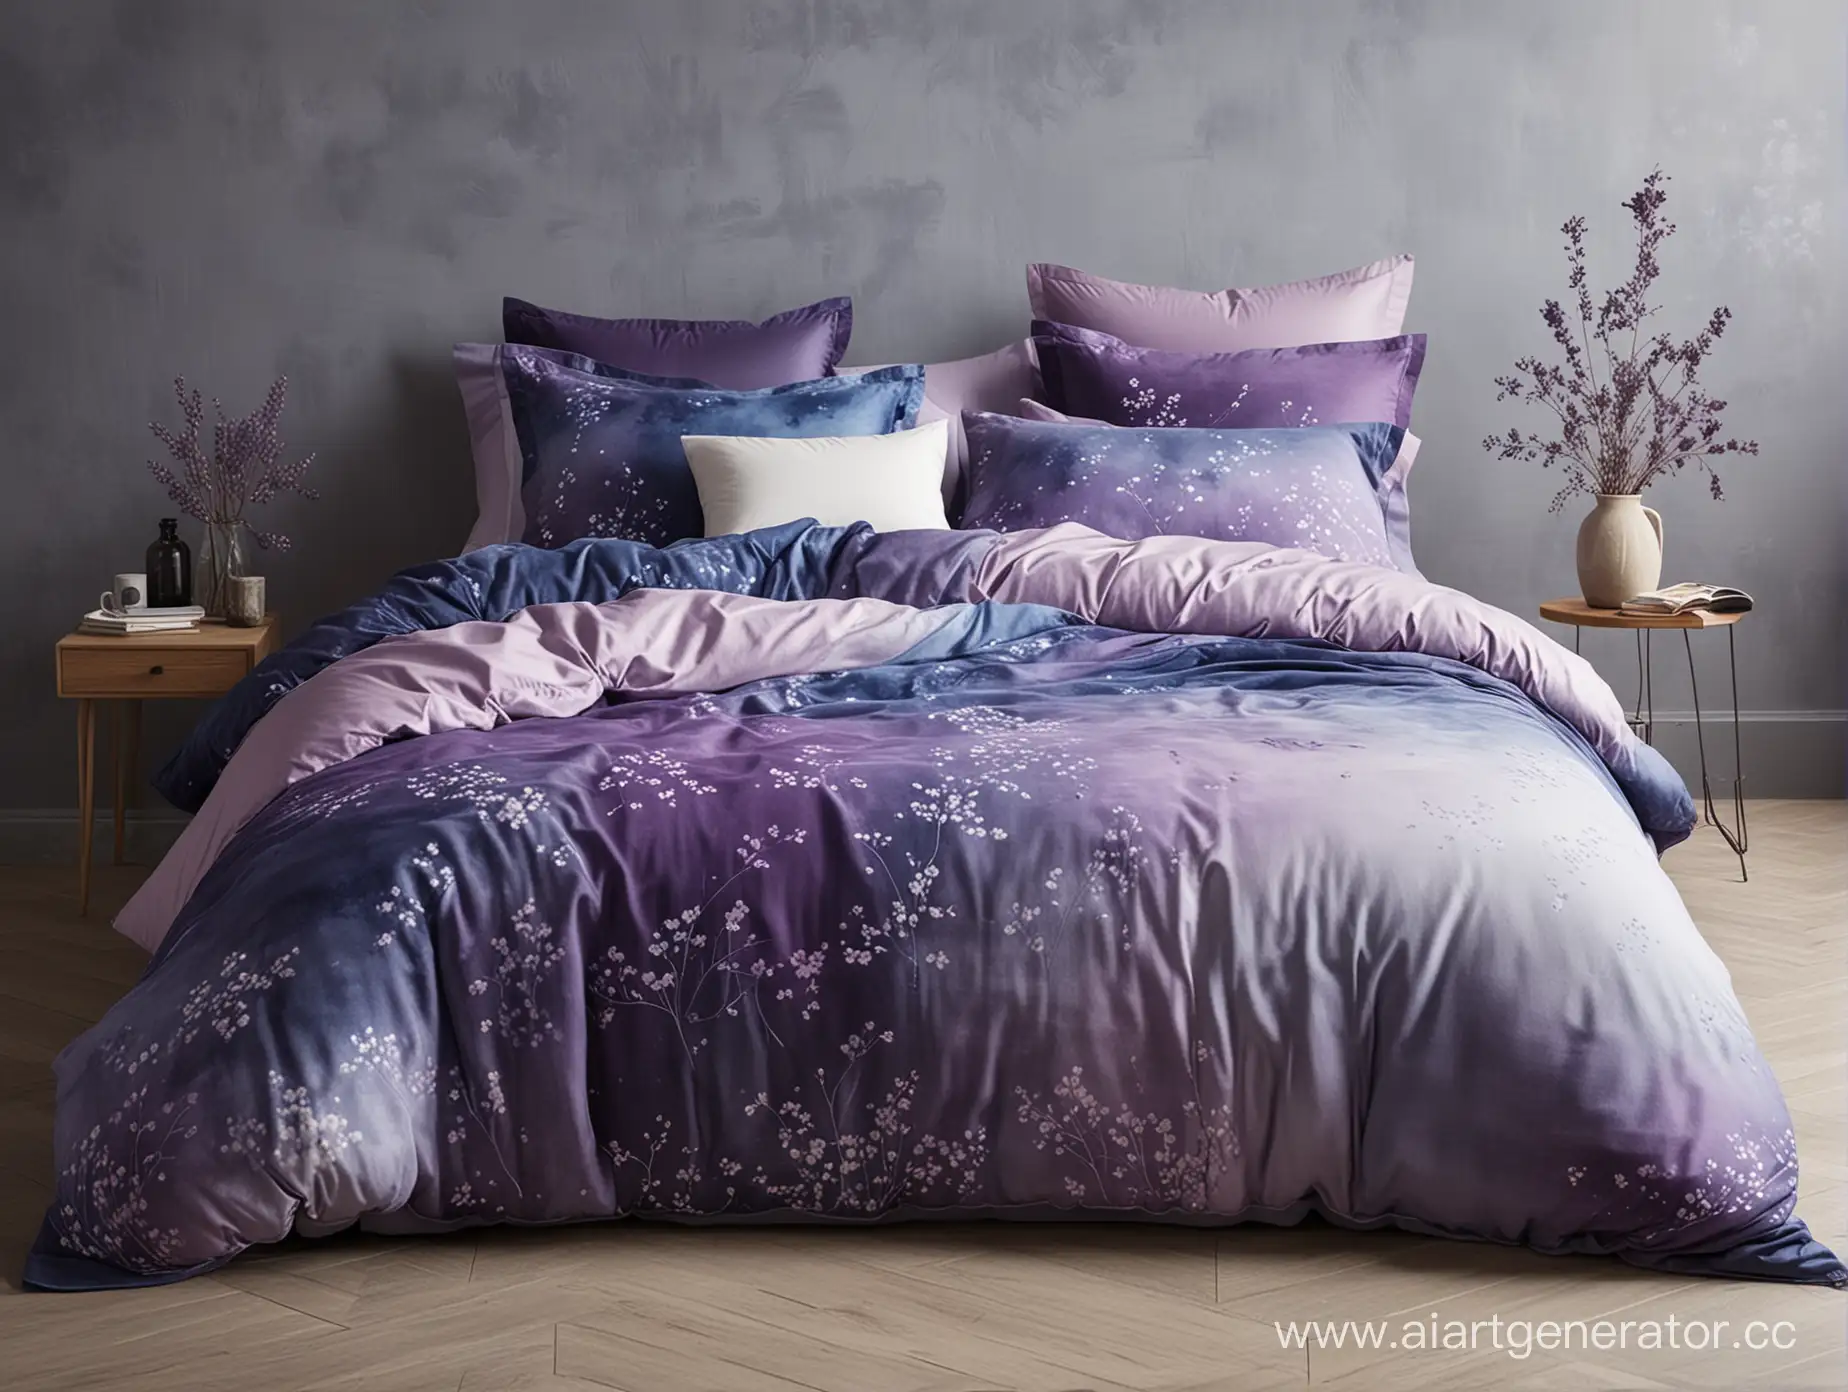 Indigo-and-Violet-Soft-Fabric-Bedding-Embrace-the-Warmth-of-World-of-Clouds